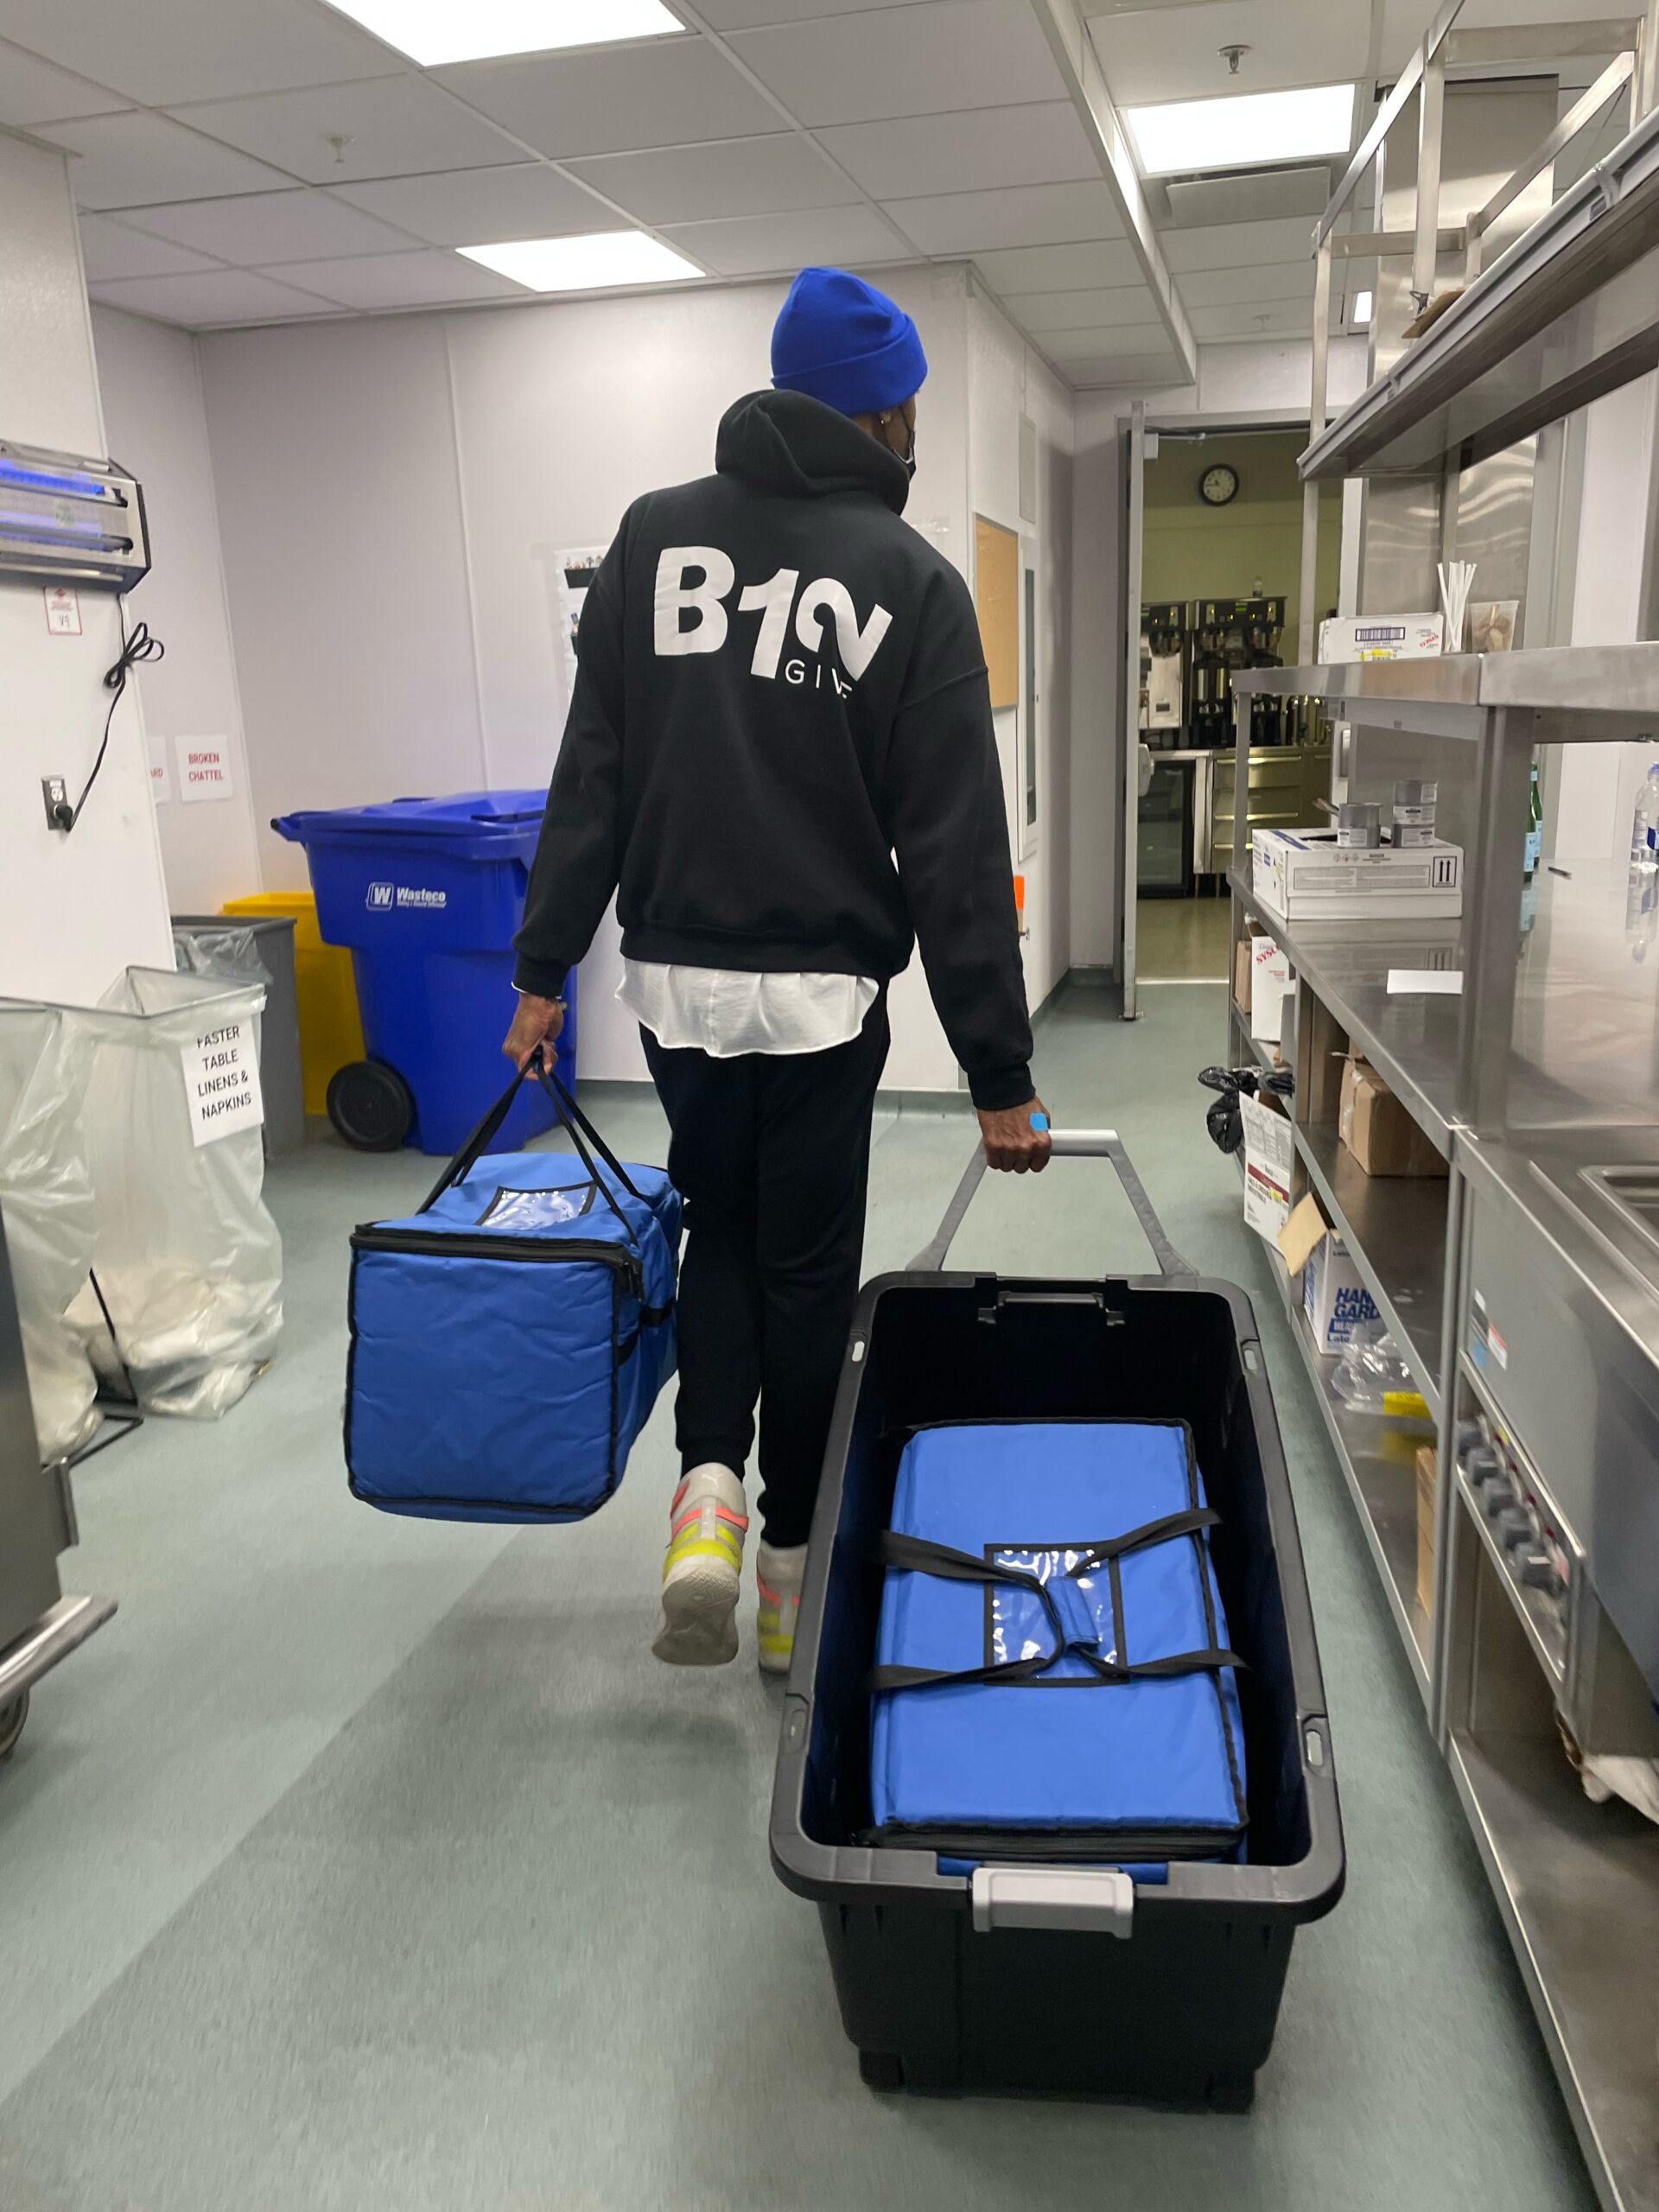 man carrying blue cooler bag and rolling another bag with B12Give logo